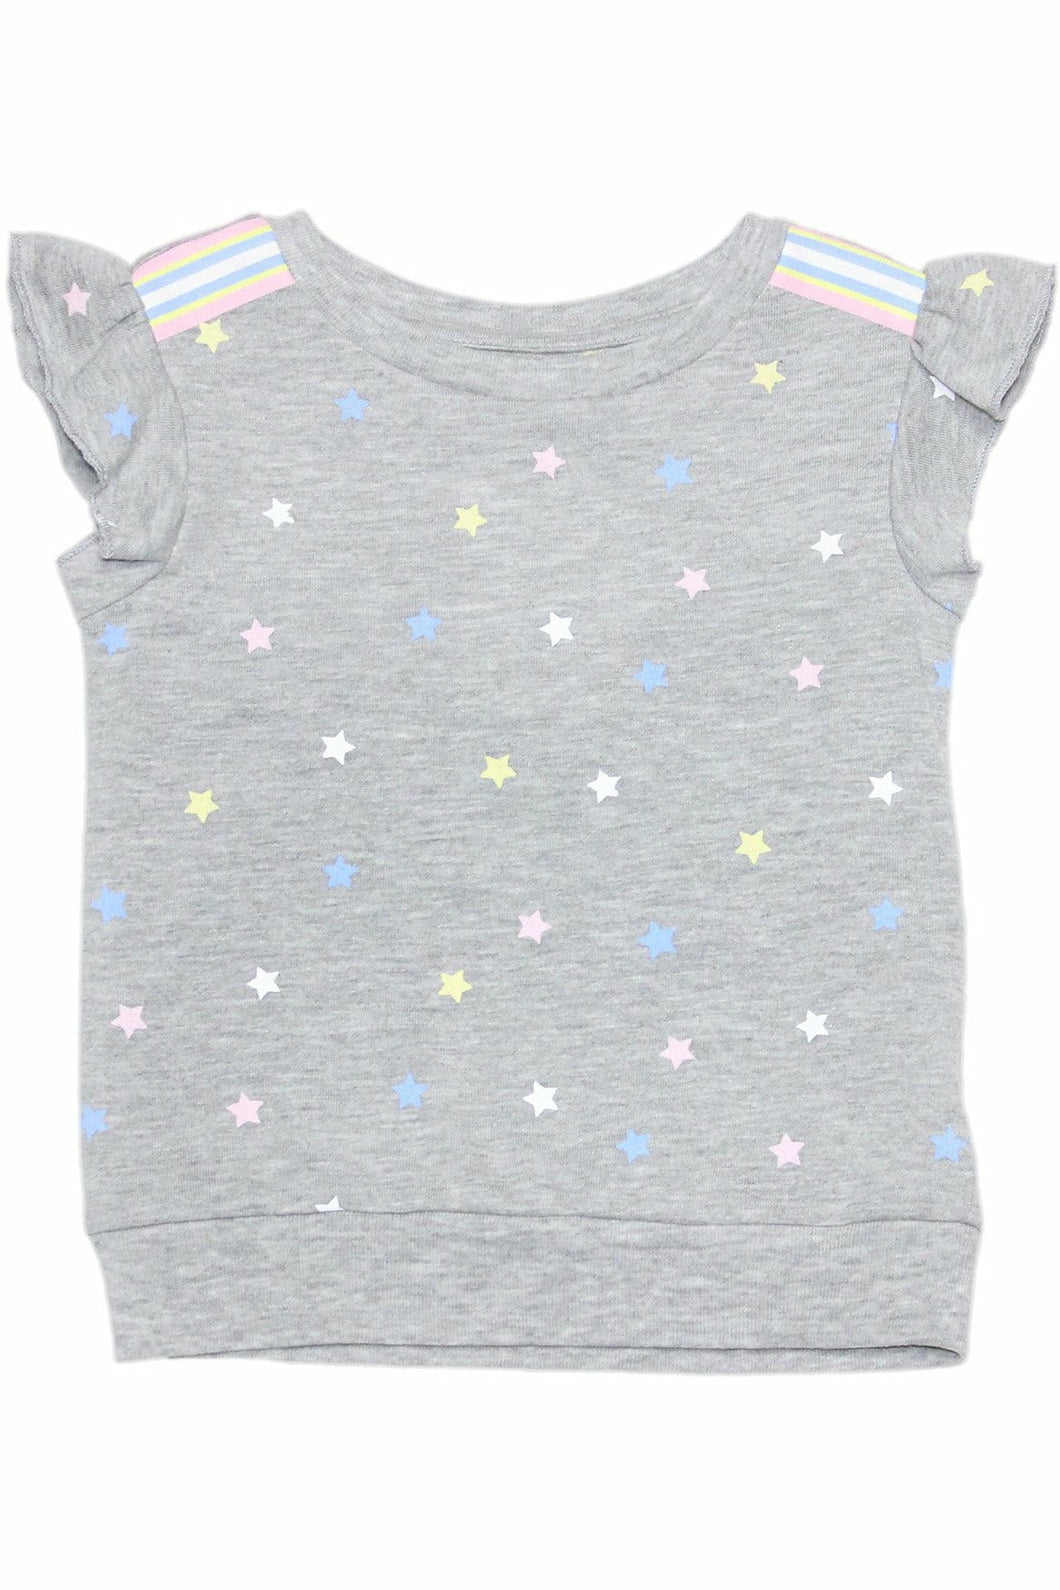 SCATTERED STARS TOP